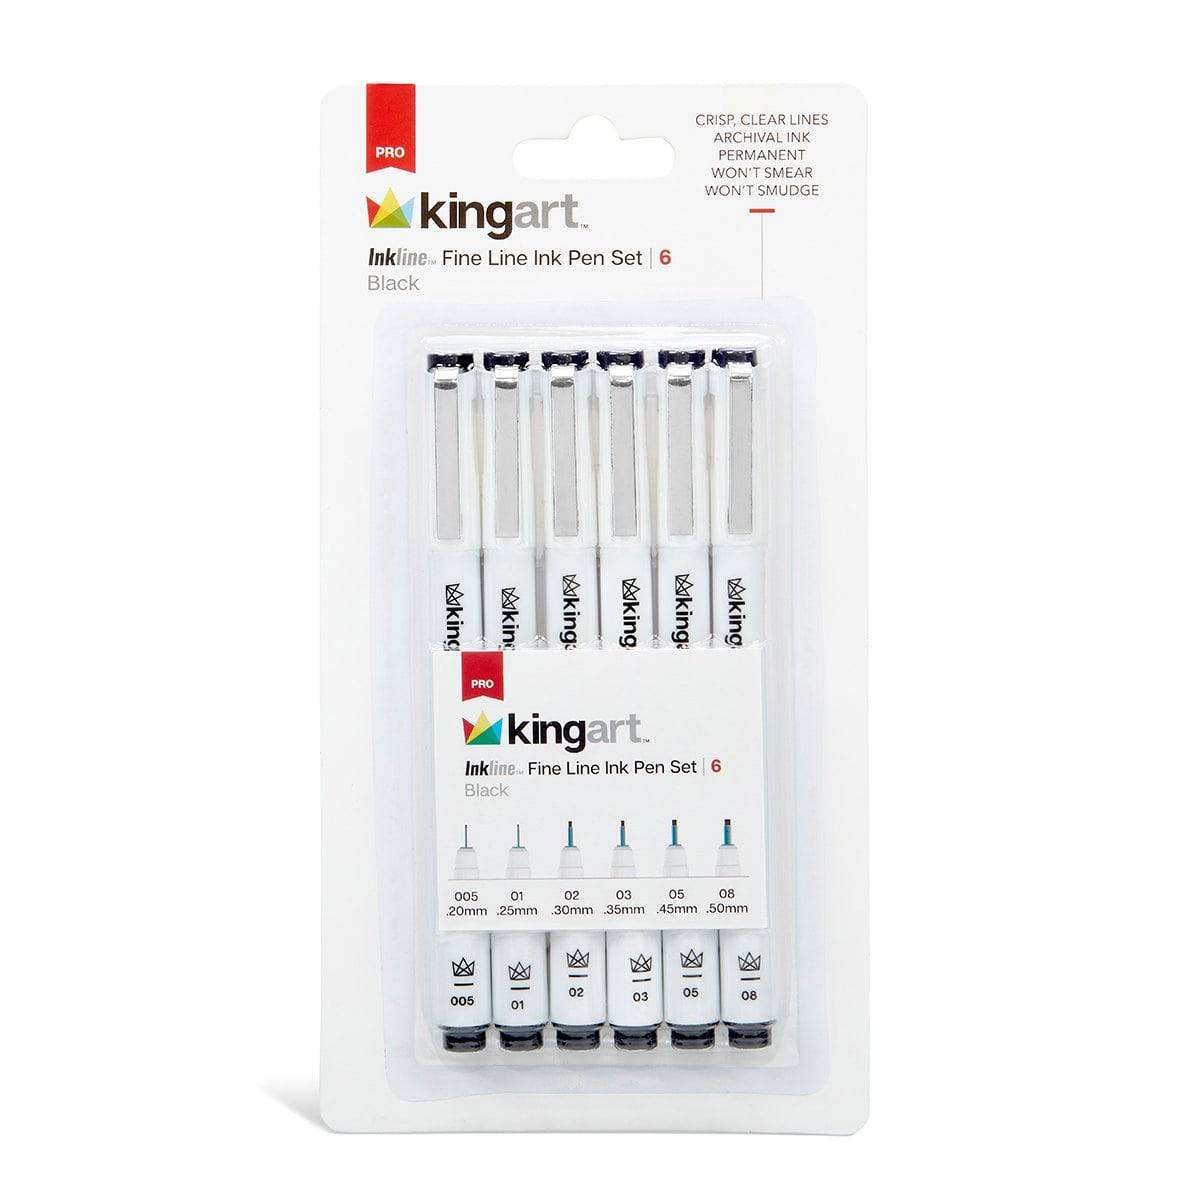 KINGART 430-10 PRO Inkline Micro Line & Precision Graphic Pens, 10 Assorted  Nibs, Archival Waterproof Black Japanese Ink for Art, Illustration